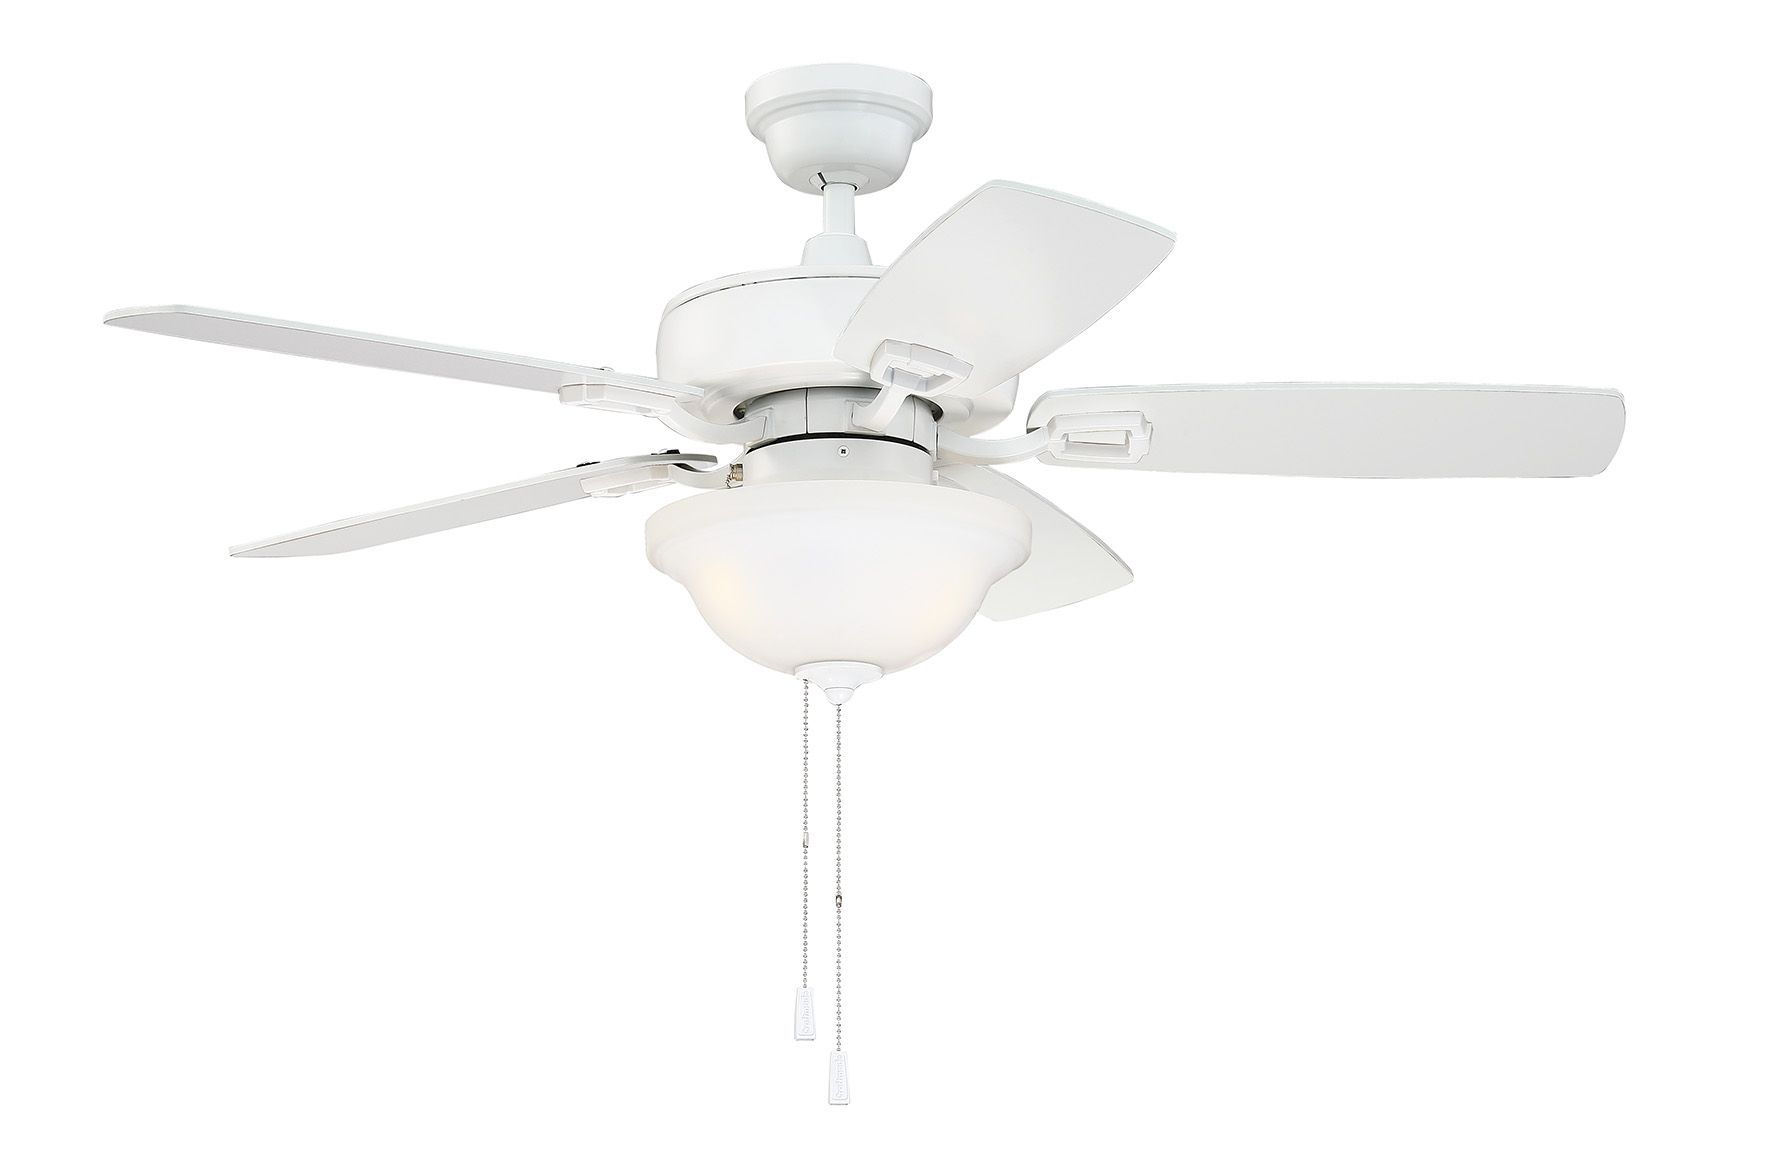 Twist N Click Ceiling Fan with Light by Craftmade TCE42W5C1 CRF596776